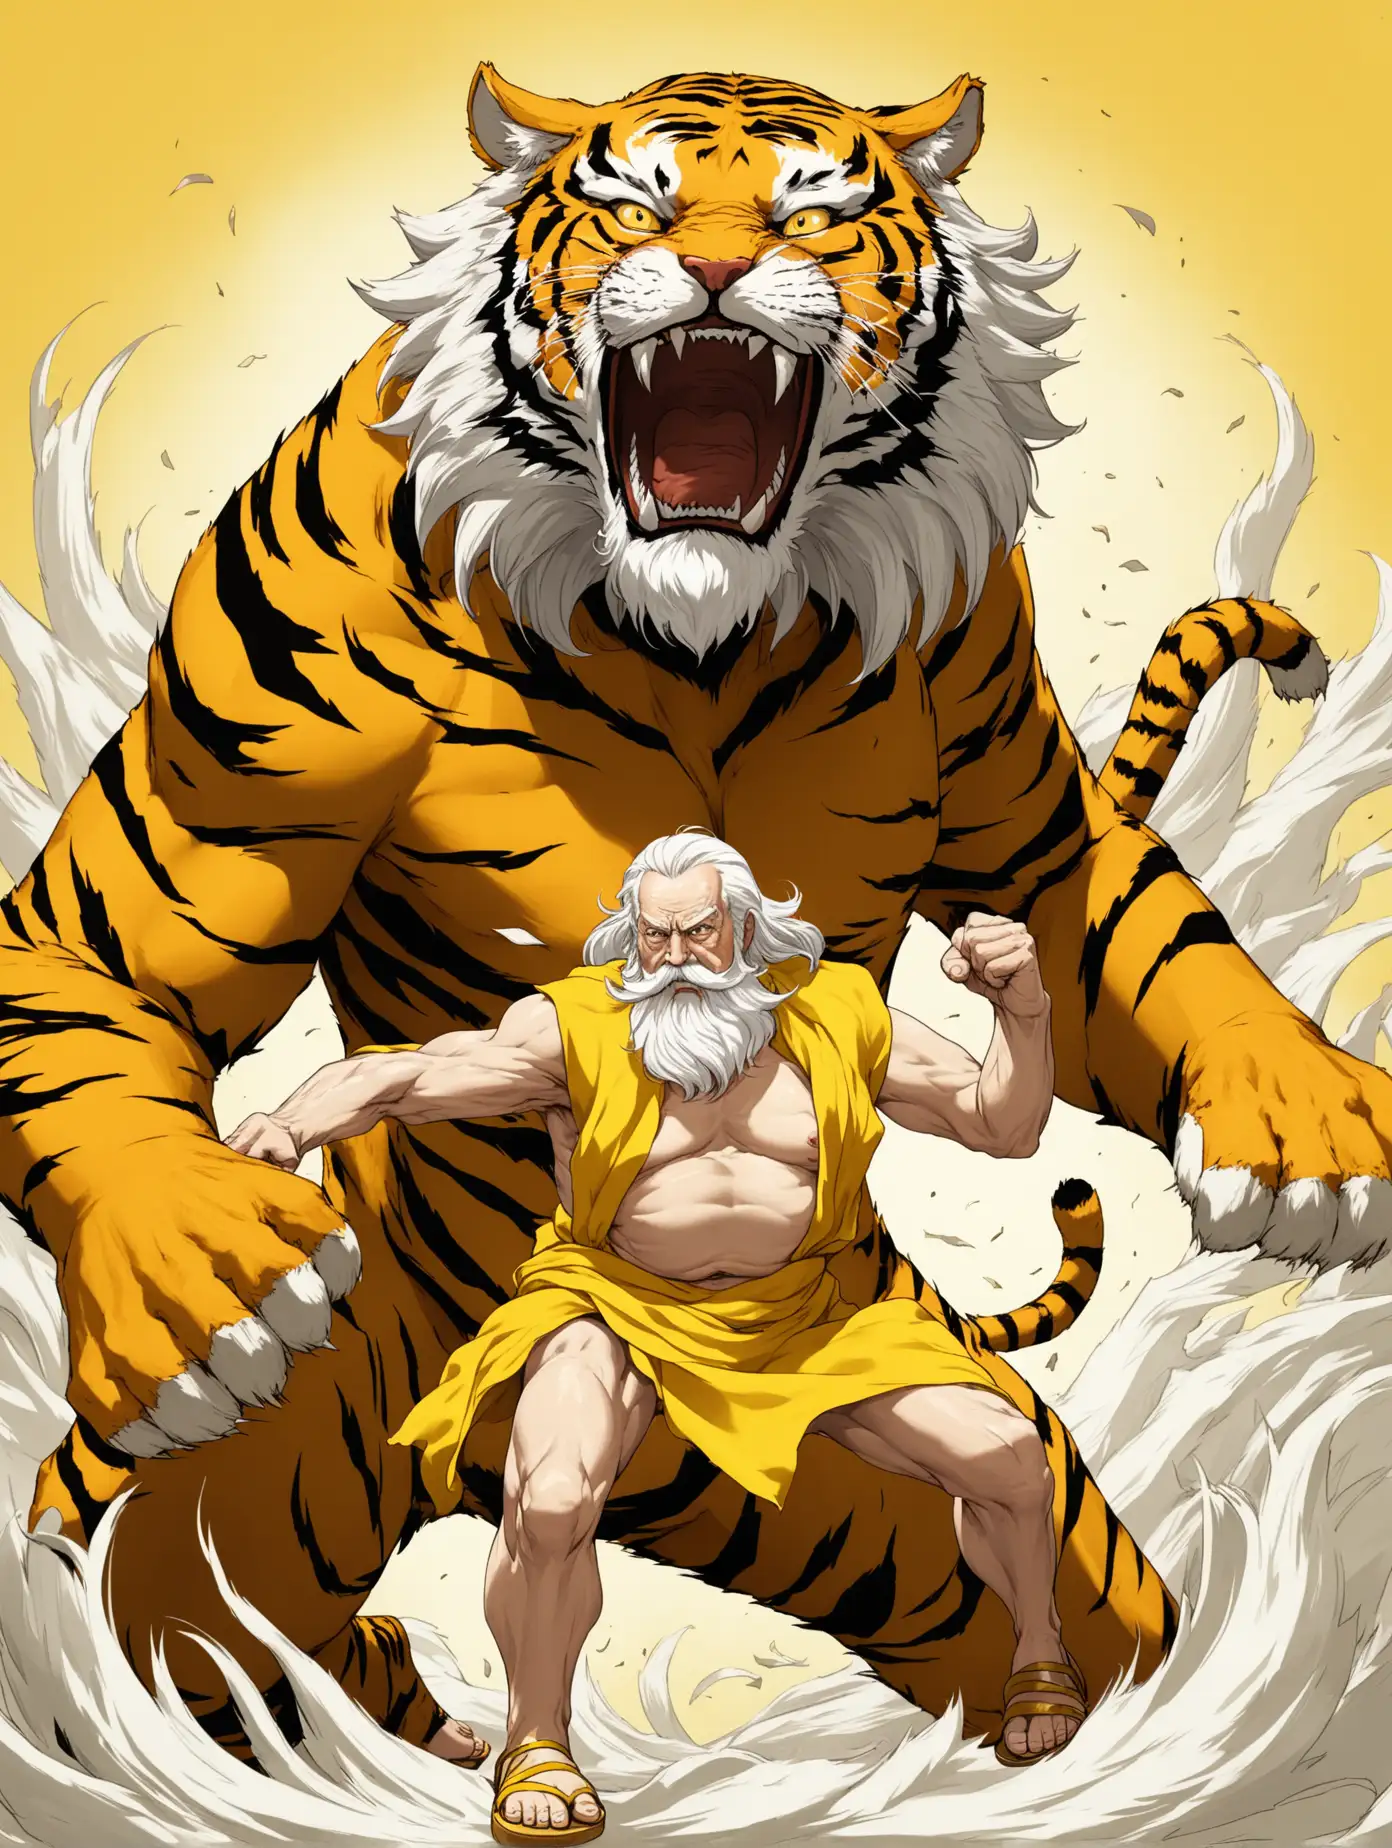 a 70 year old man. long white hair, white beard and moustache, bare chested, wearing a long yellow cloth, yellow sandals, fighting against a giant tiger. yellow backround